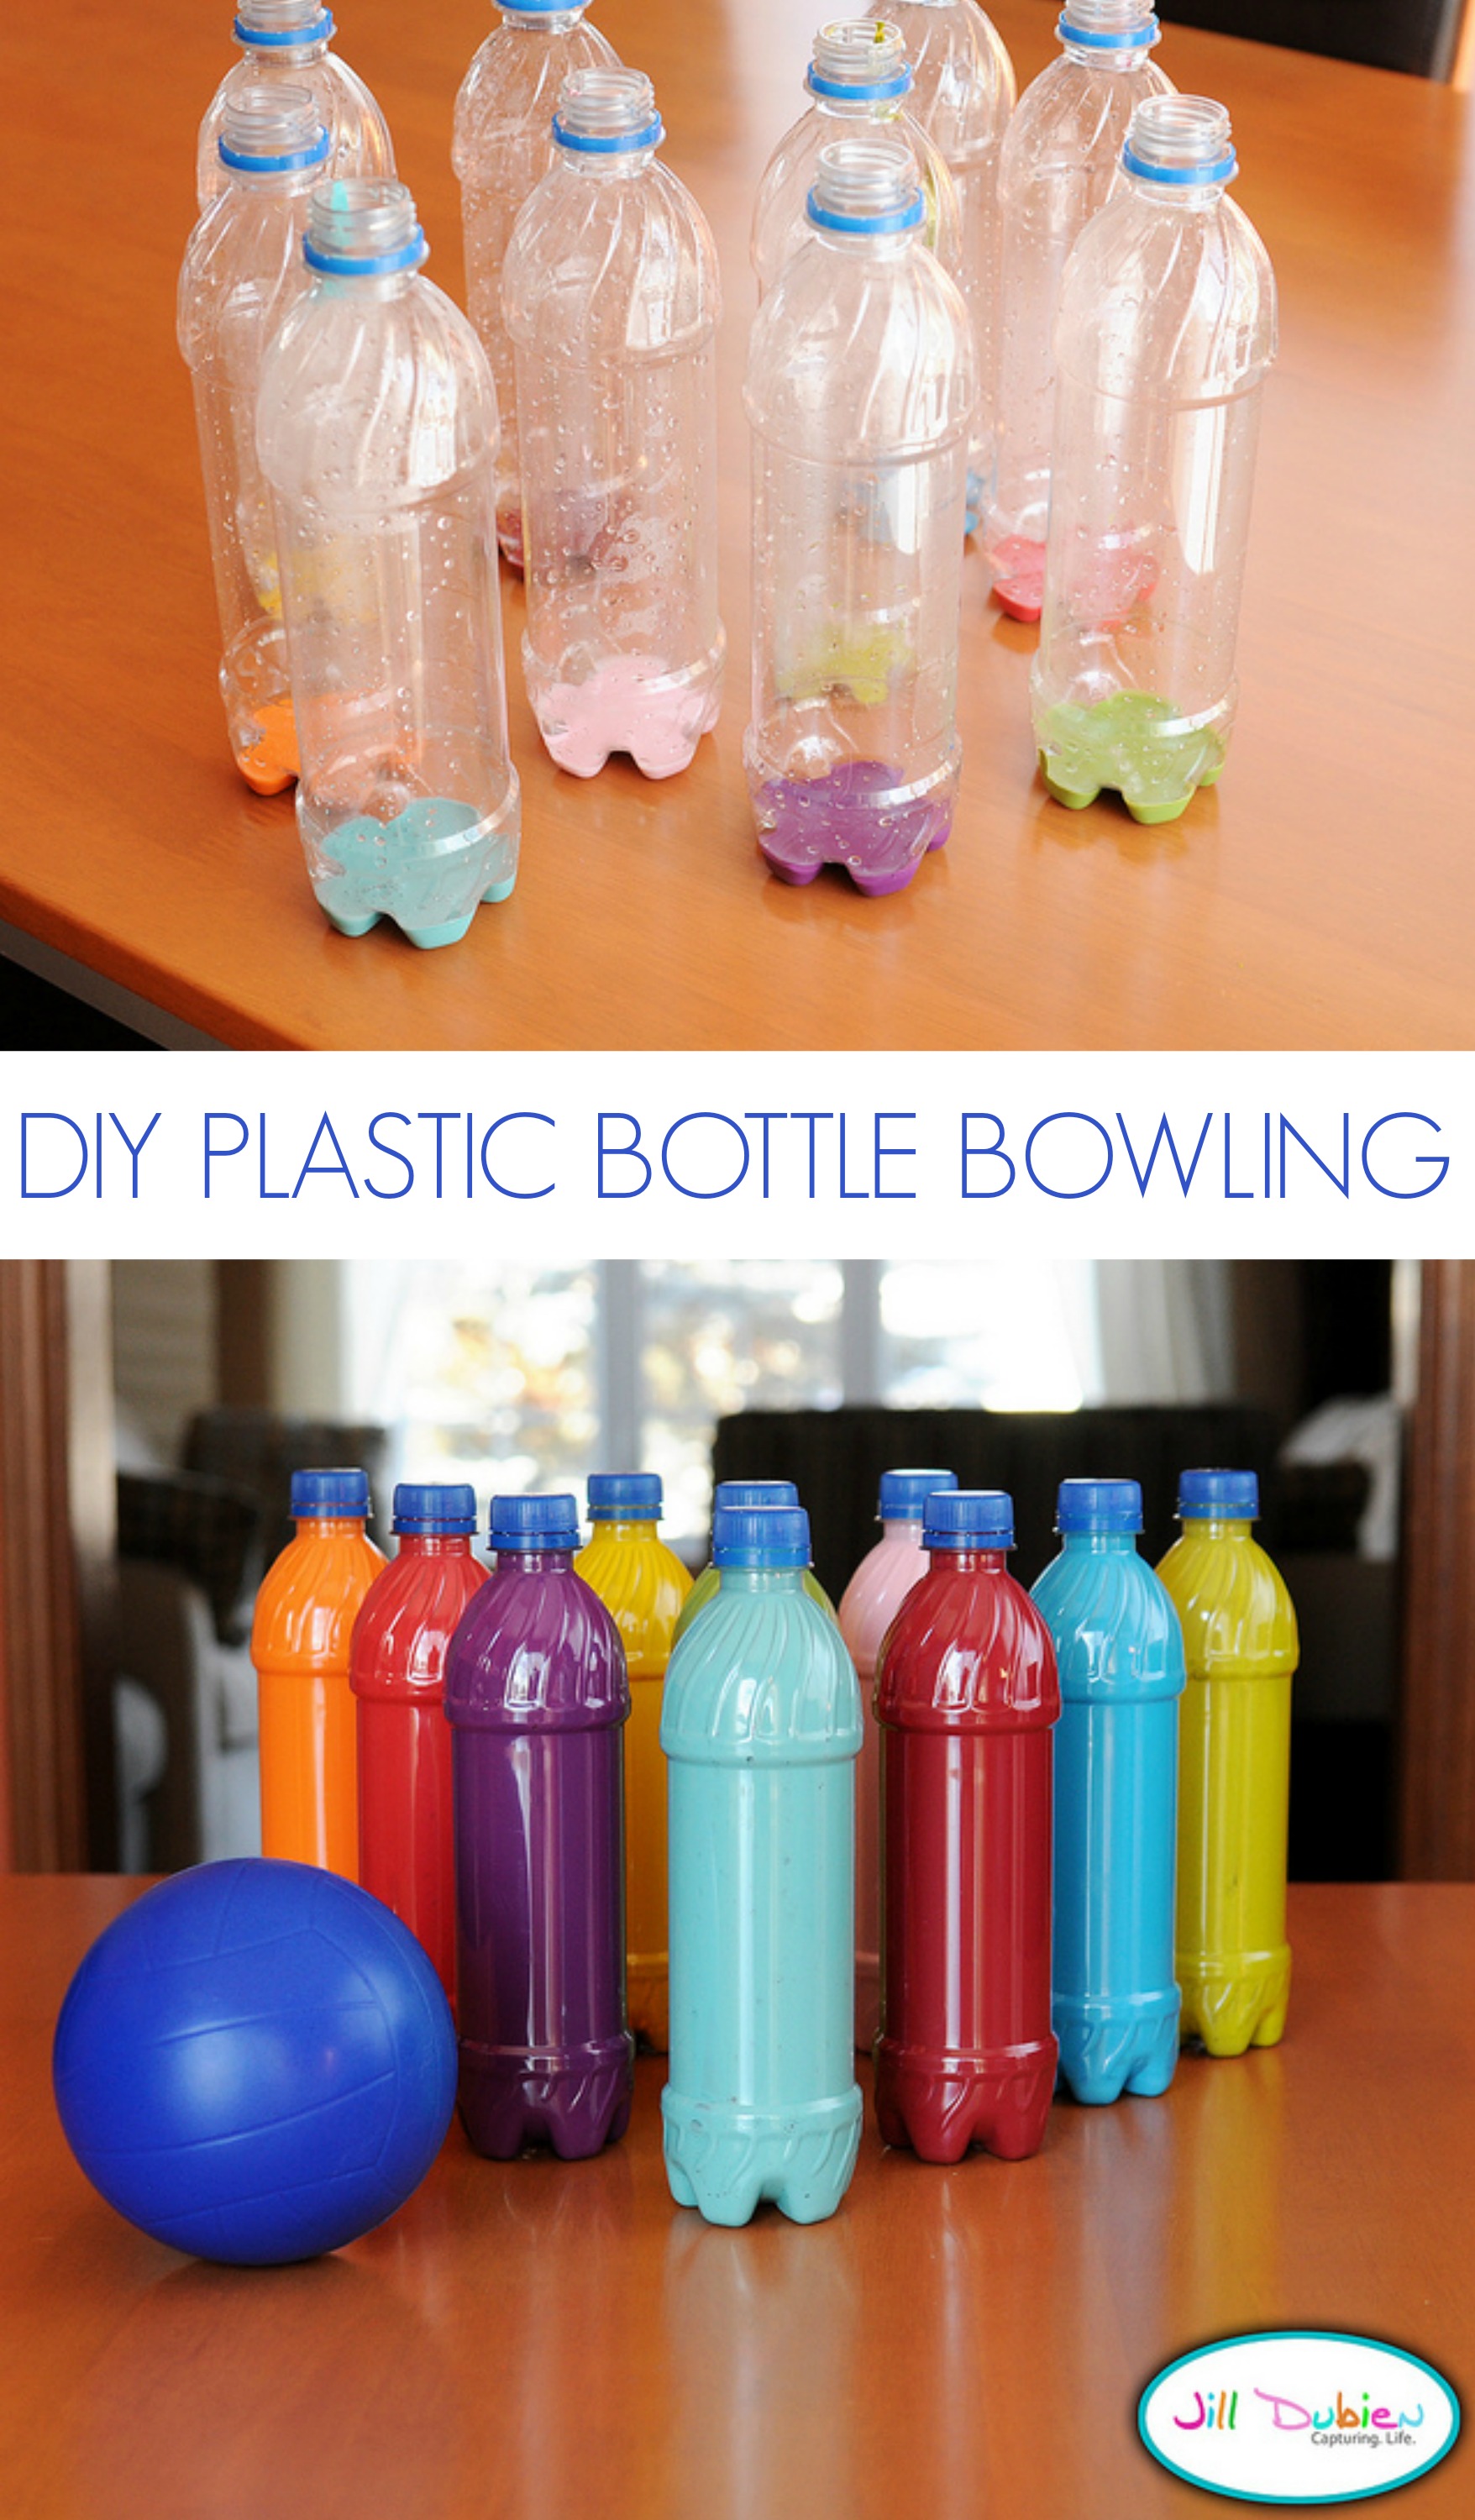 Turn water bottle into a fun bowling game for the kids!!